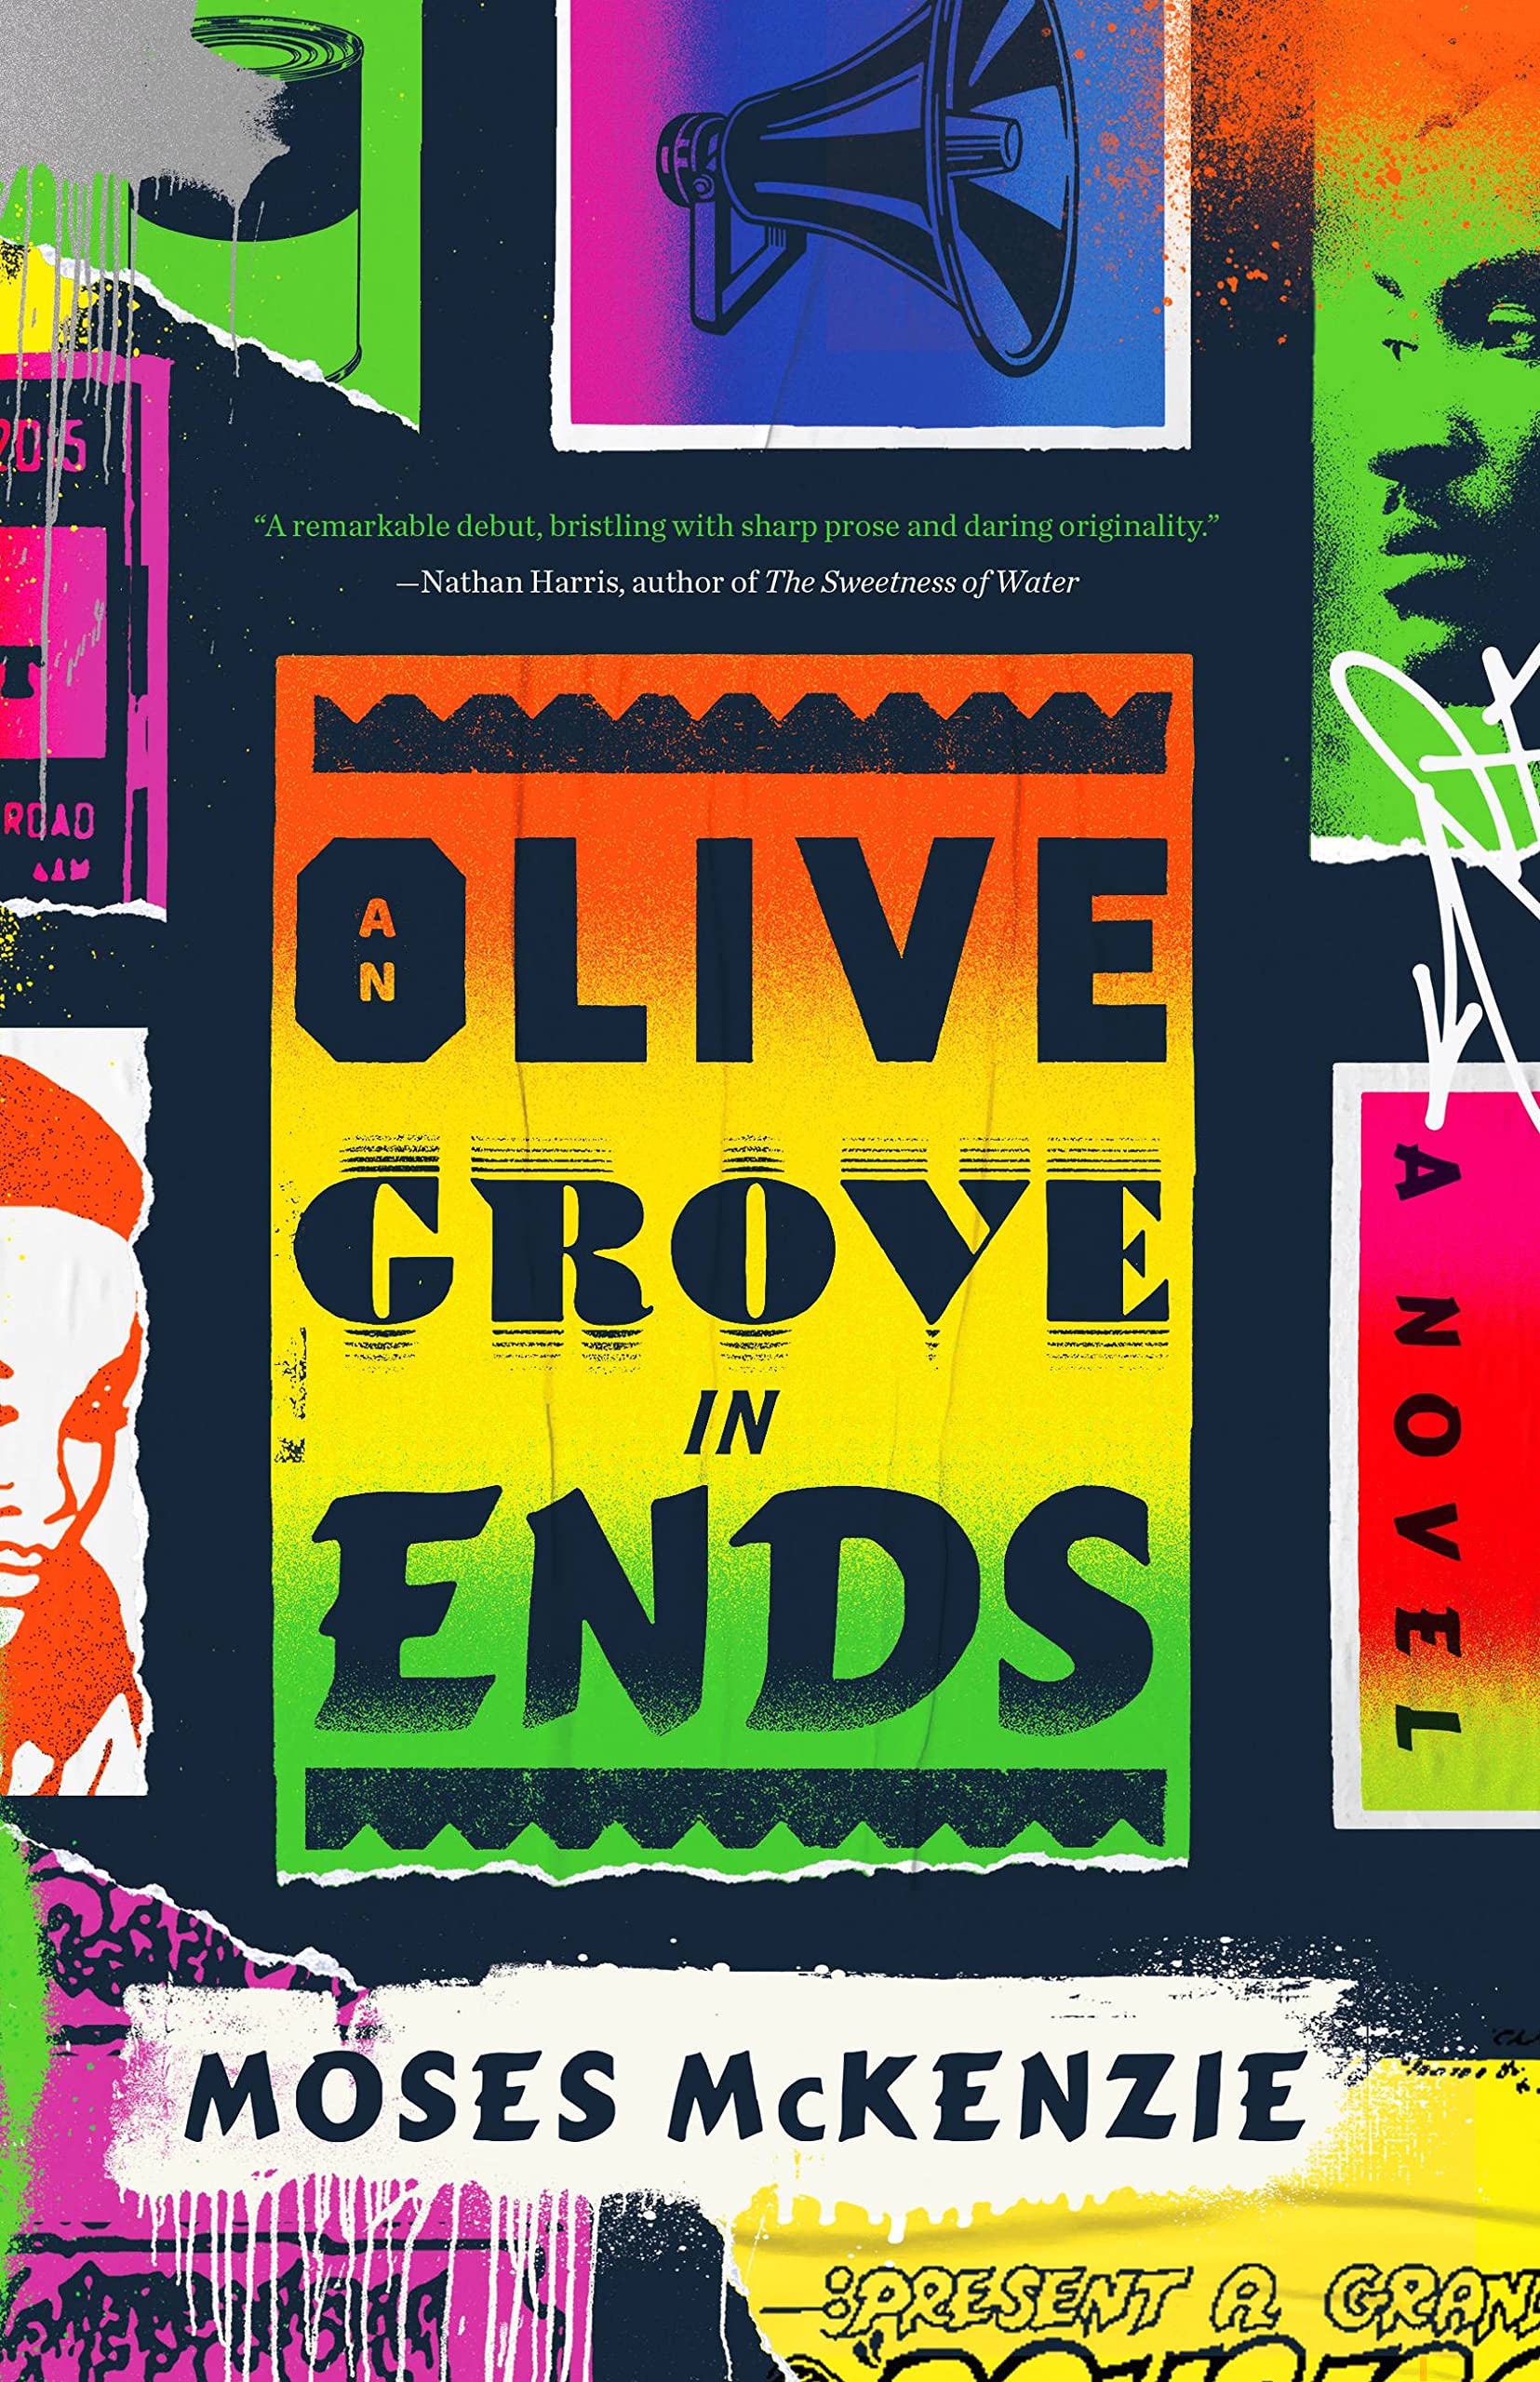 Image for "An Olive Grove in Ends"